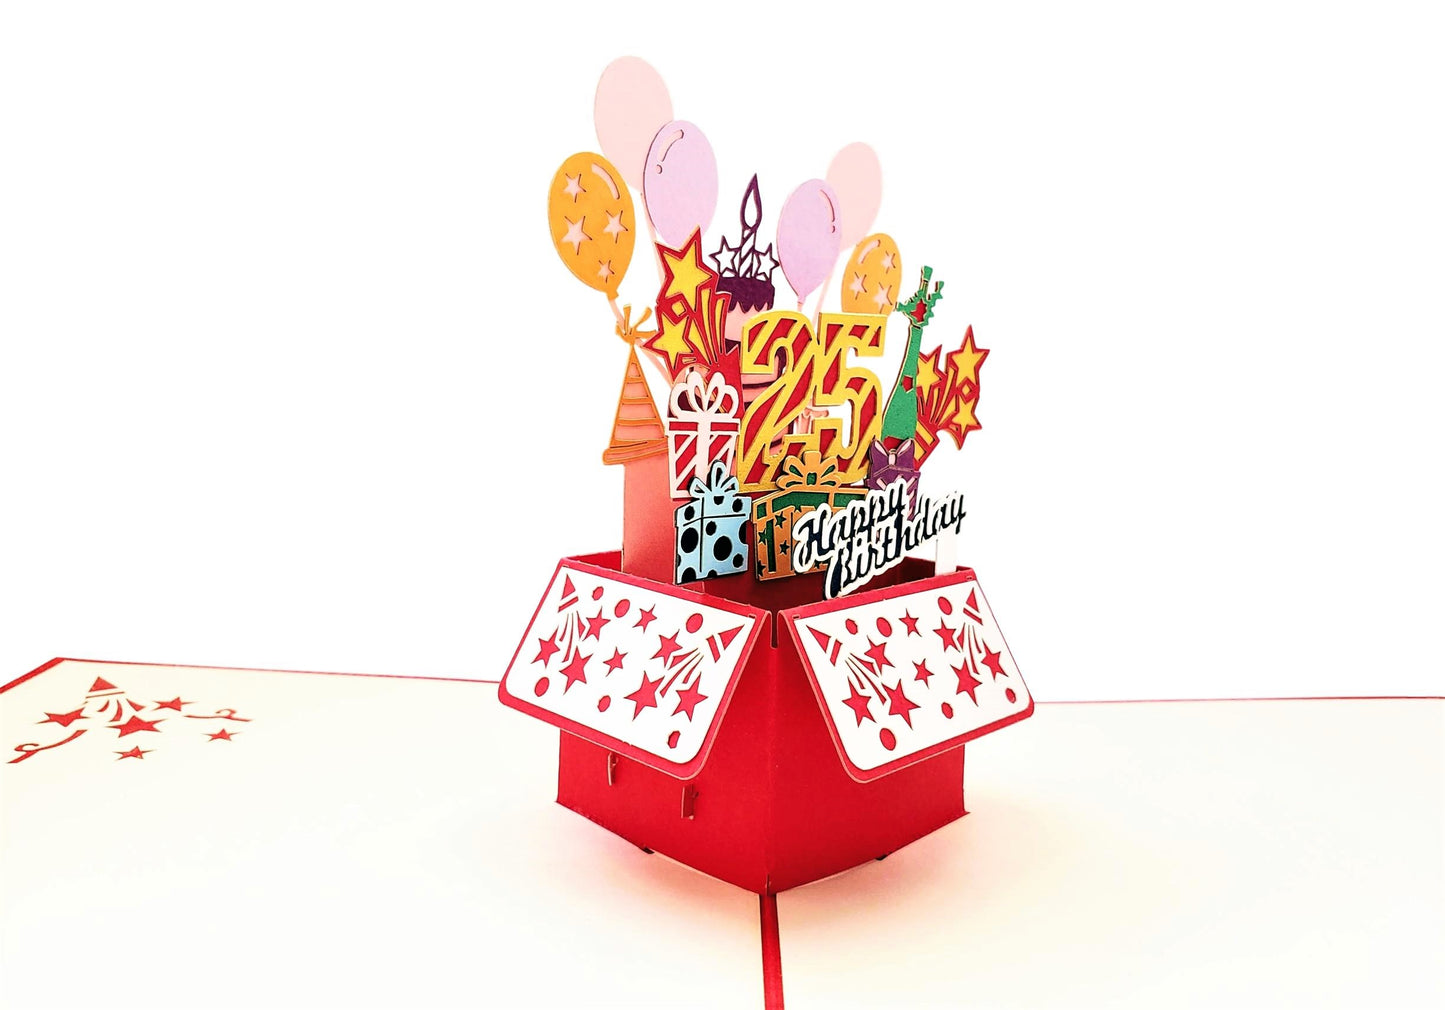 25th Red Party Box 3D Pop Up Greeting Card - Awesome - Balloons - best wishes - Birthday - Brighten - iGifts And Cards